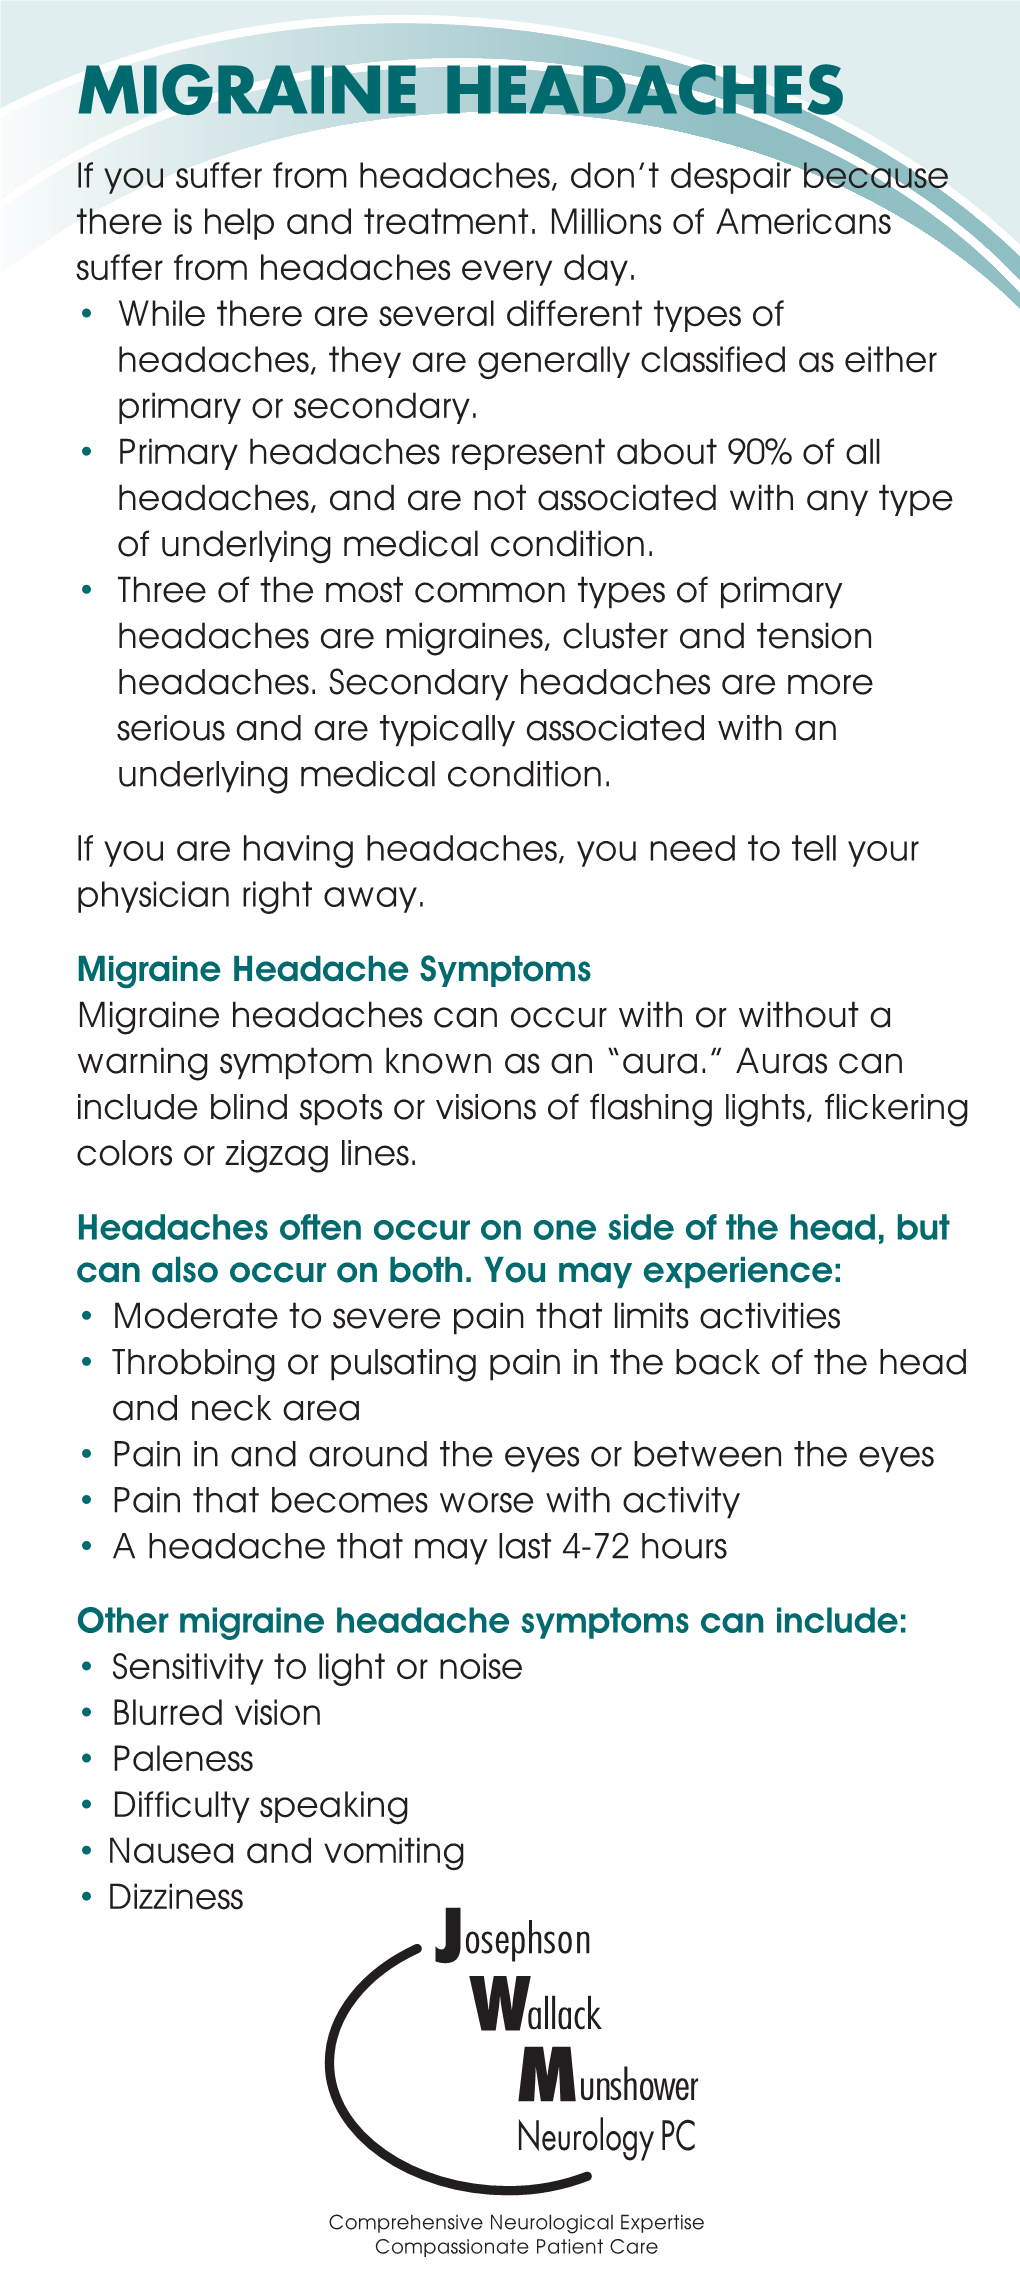 MIGRAINE HEADACHES If You Suffer from Headaches, Don’T Despair Because There Is Help and Treatment